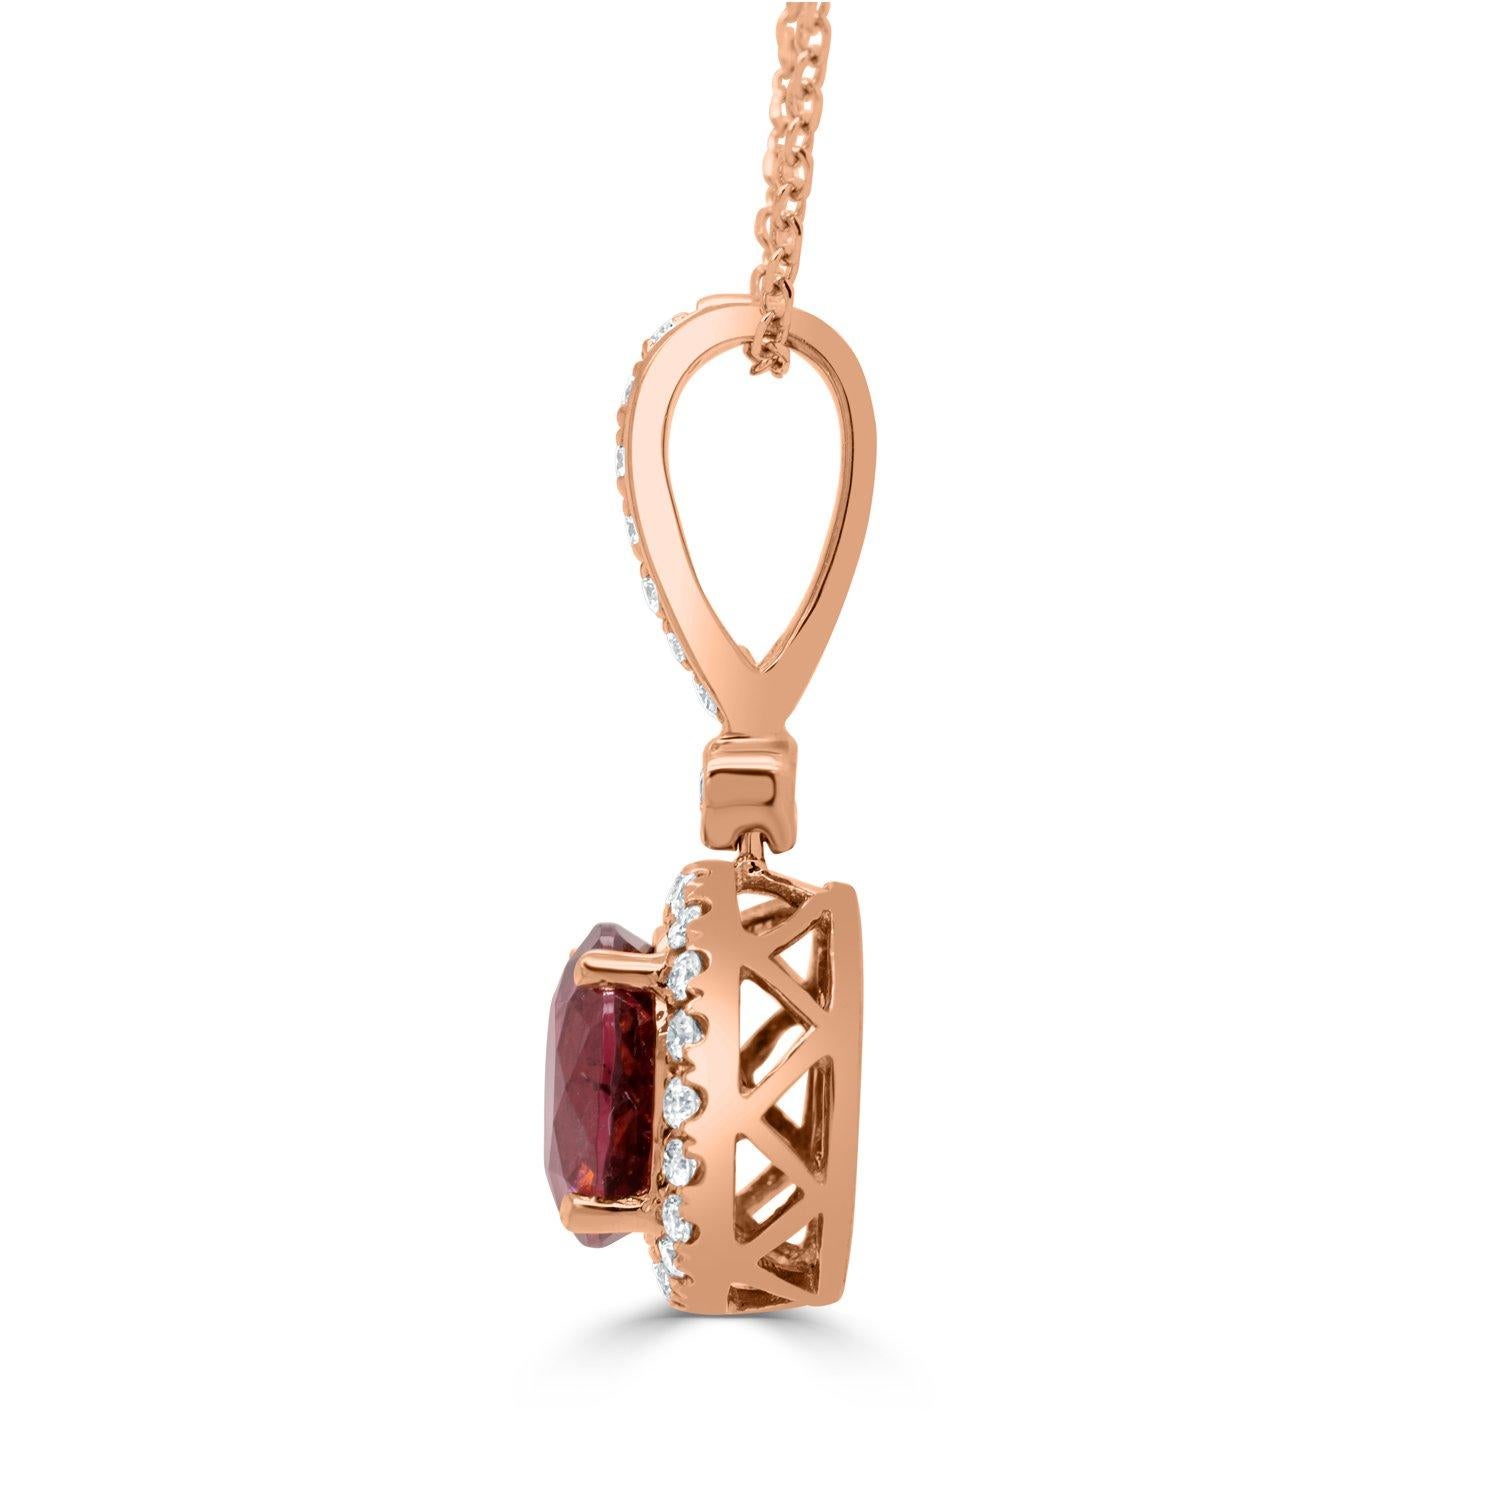 Somewhere between Pink Tourmaline and Rubellite, this gorgeous piece has an amazing bright red-pink blush color. Set in a classic halo design by our artisan jewelers, this pendant also features 0.22ct of diamonds in 14K Rose Gold. Wear this pendant